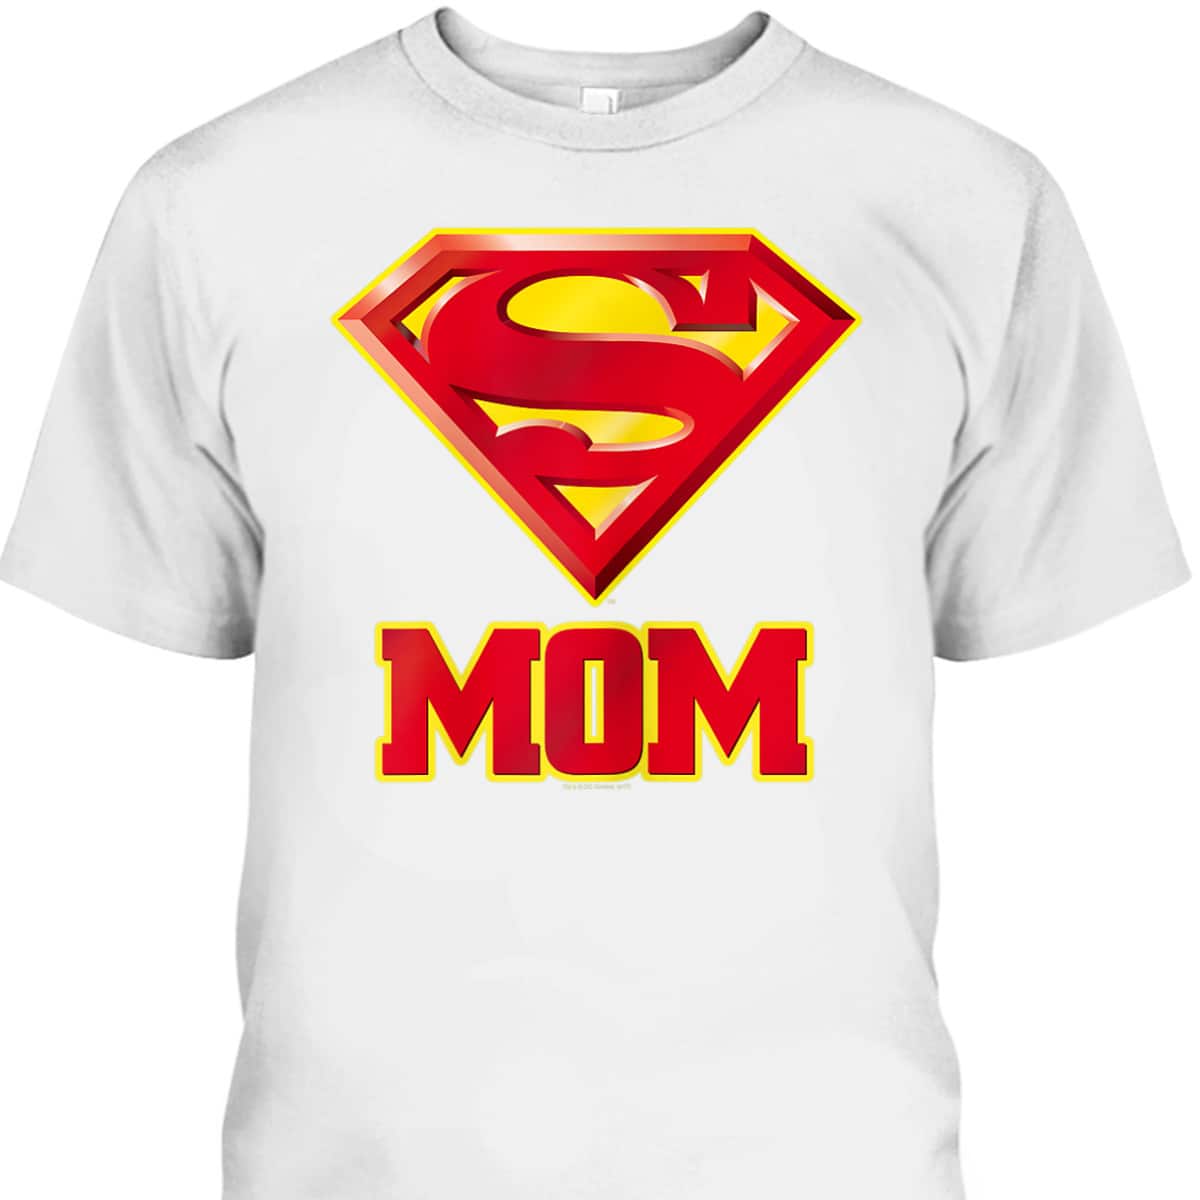 Superman Mother’s Day T-Shirt Super Mom Gift